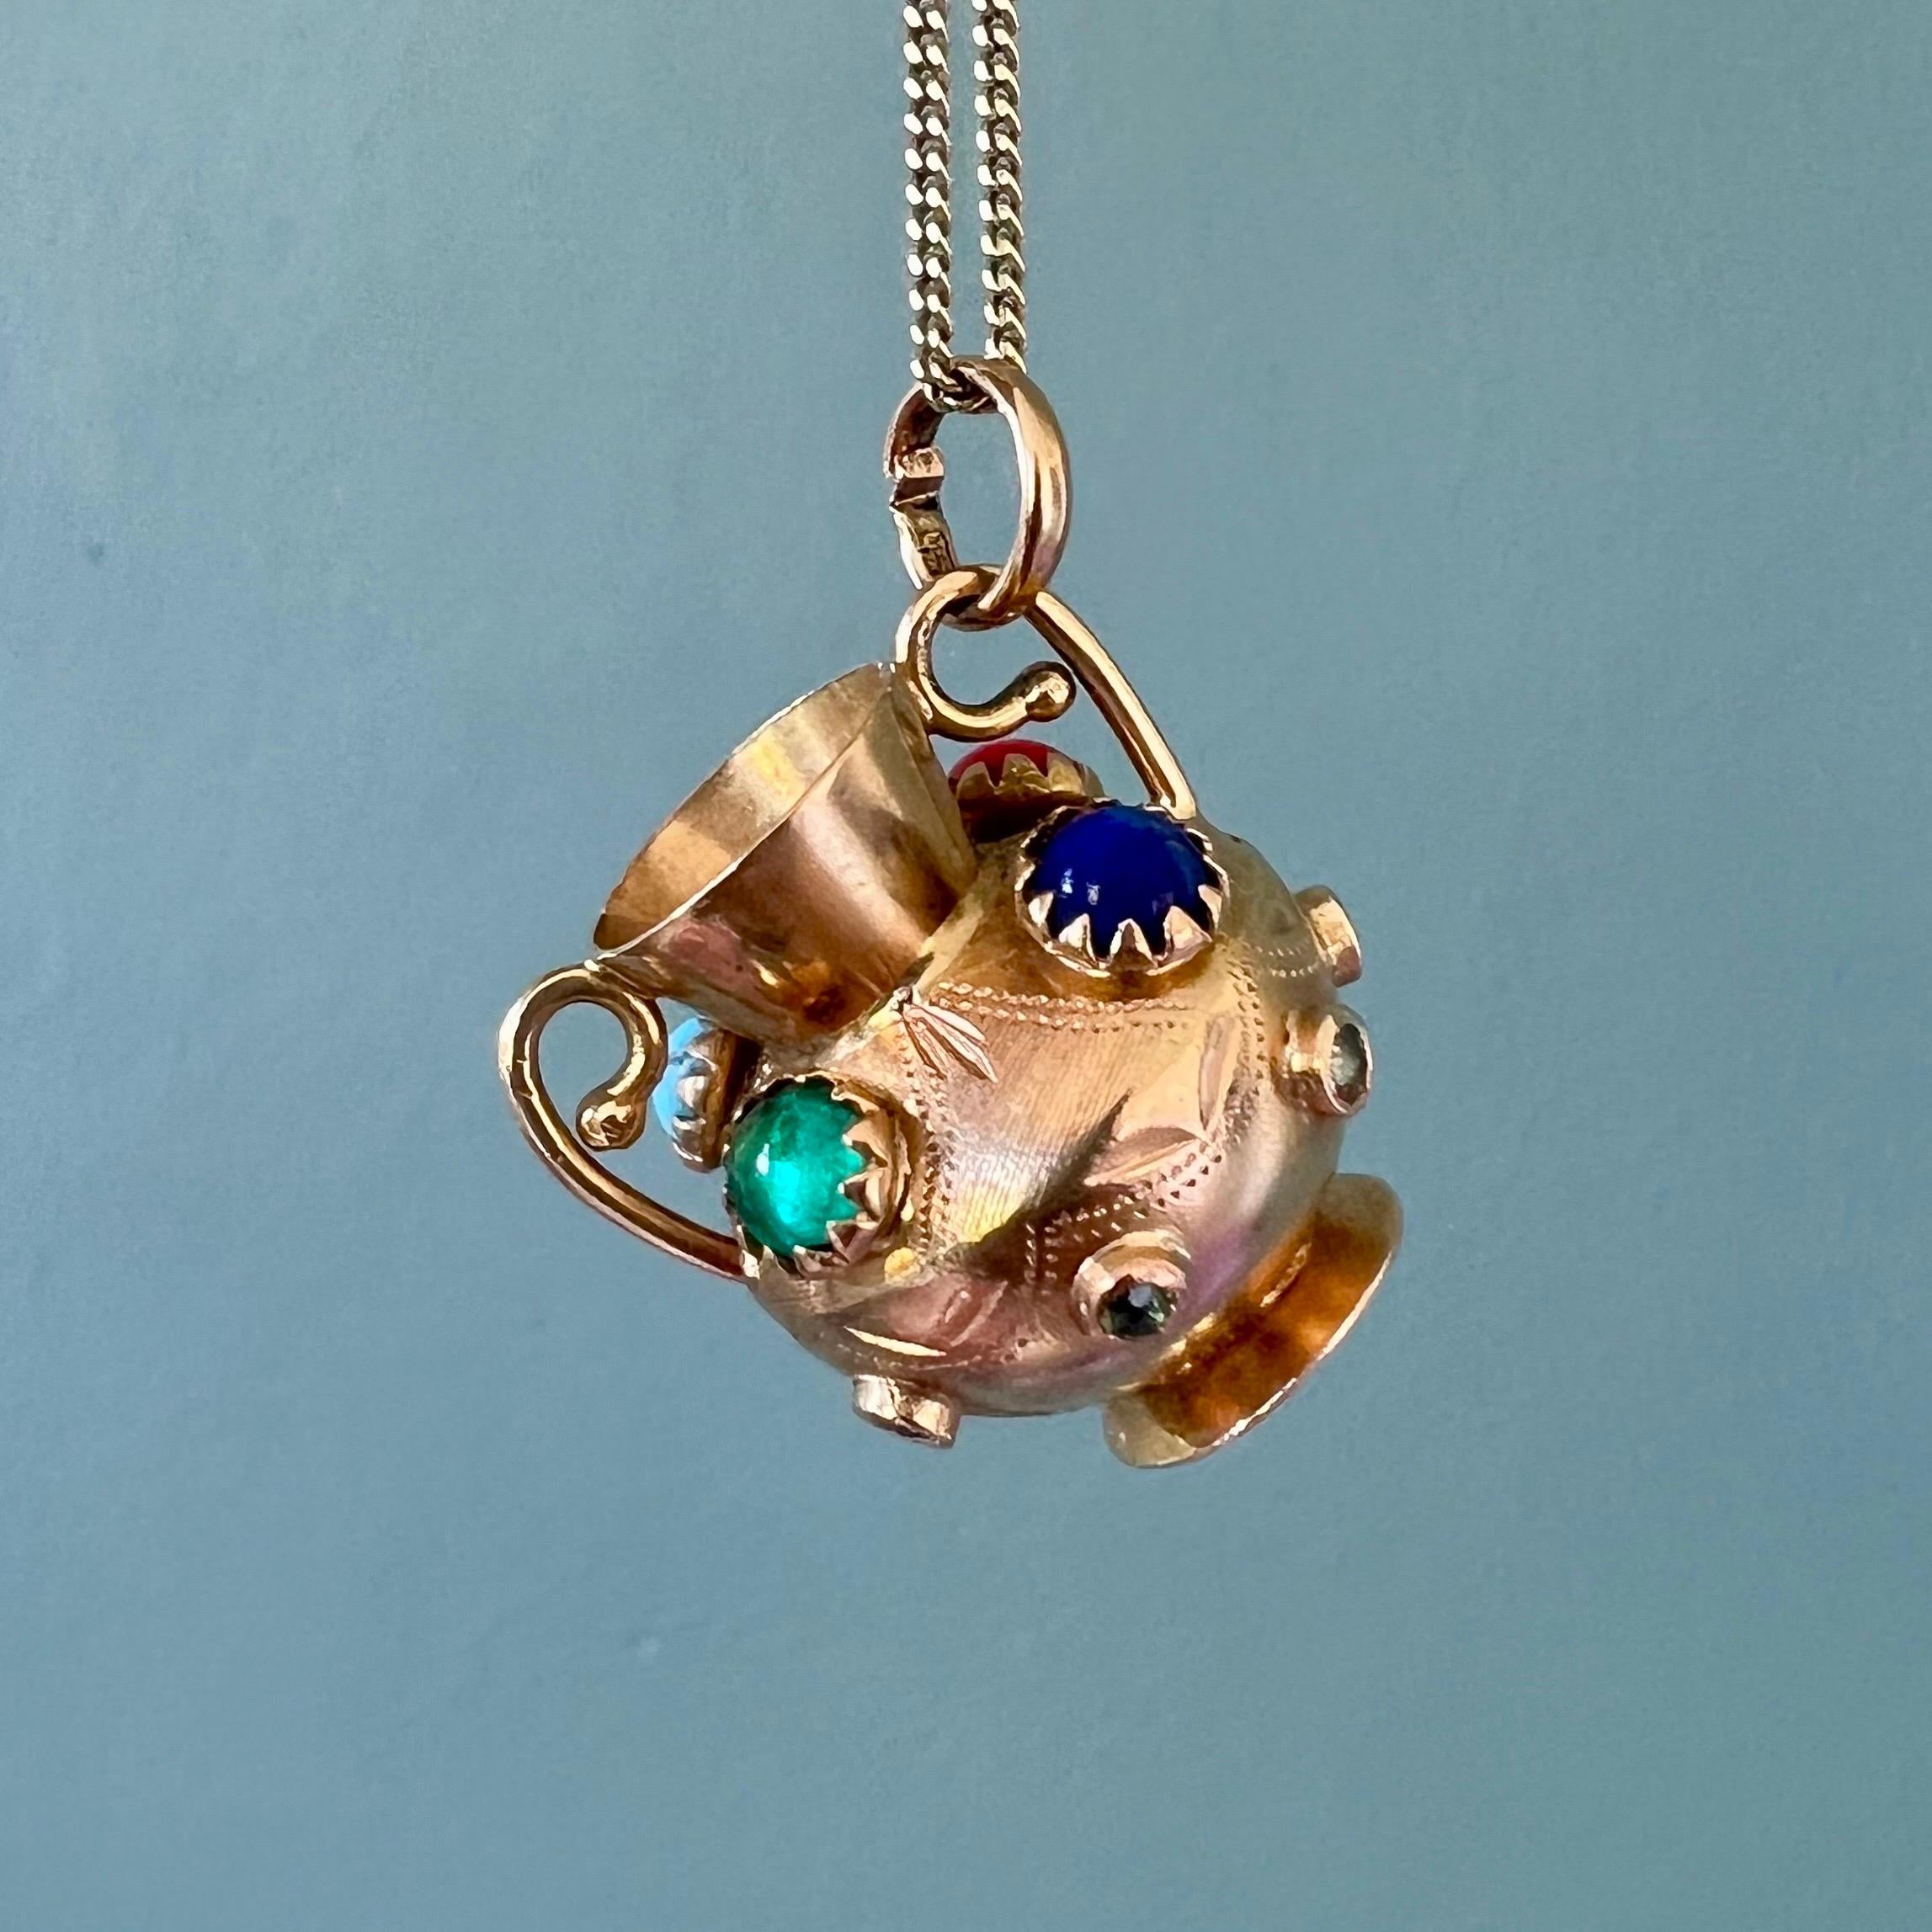 A lovely vintage Italian 18 karat yellow gold wide vase charm pendant adorned with fine colored stones. The charm is nicely modeled into a Greek-style vase and set with multi-colored stones on the surface of the vase body. The charm comes without